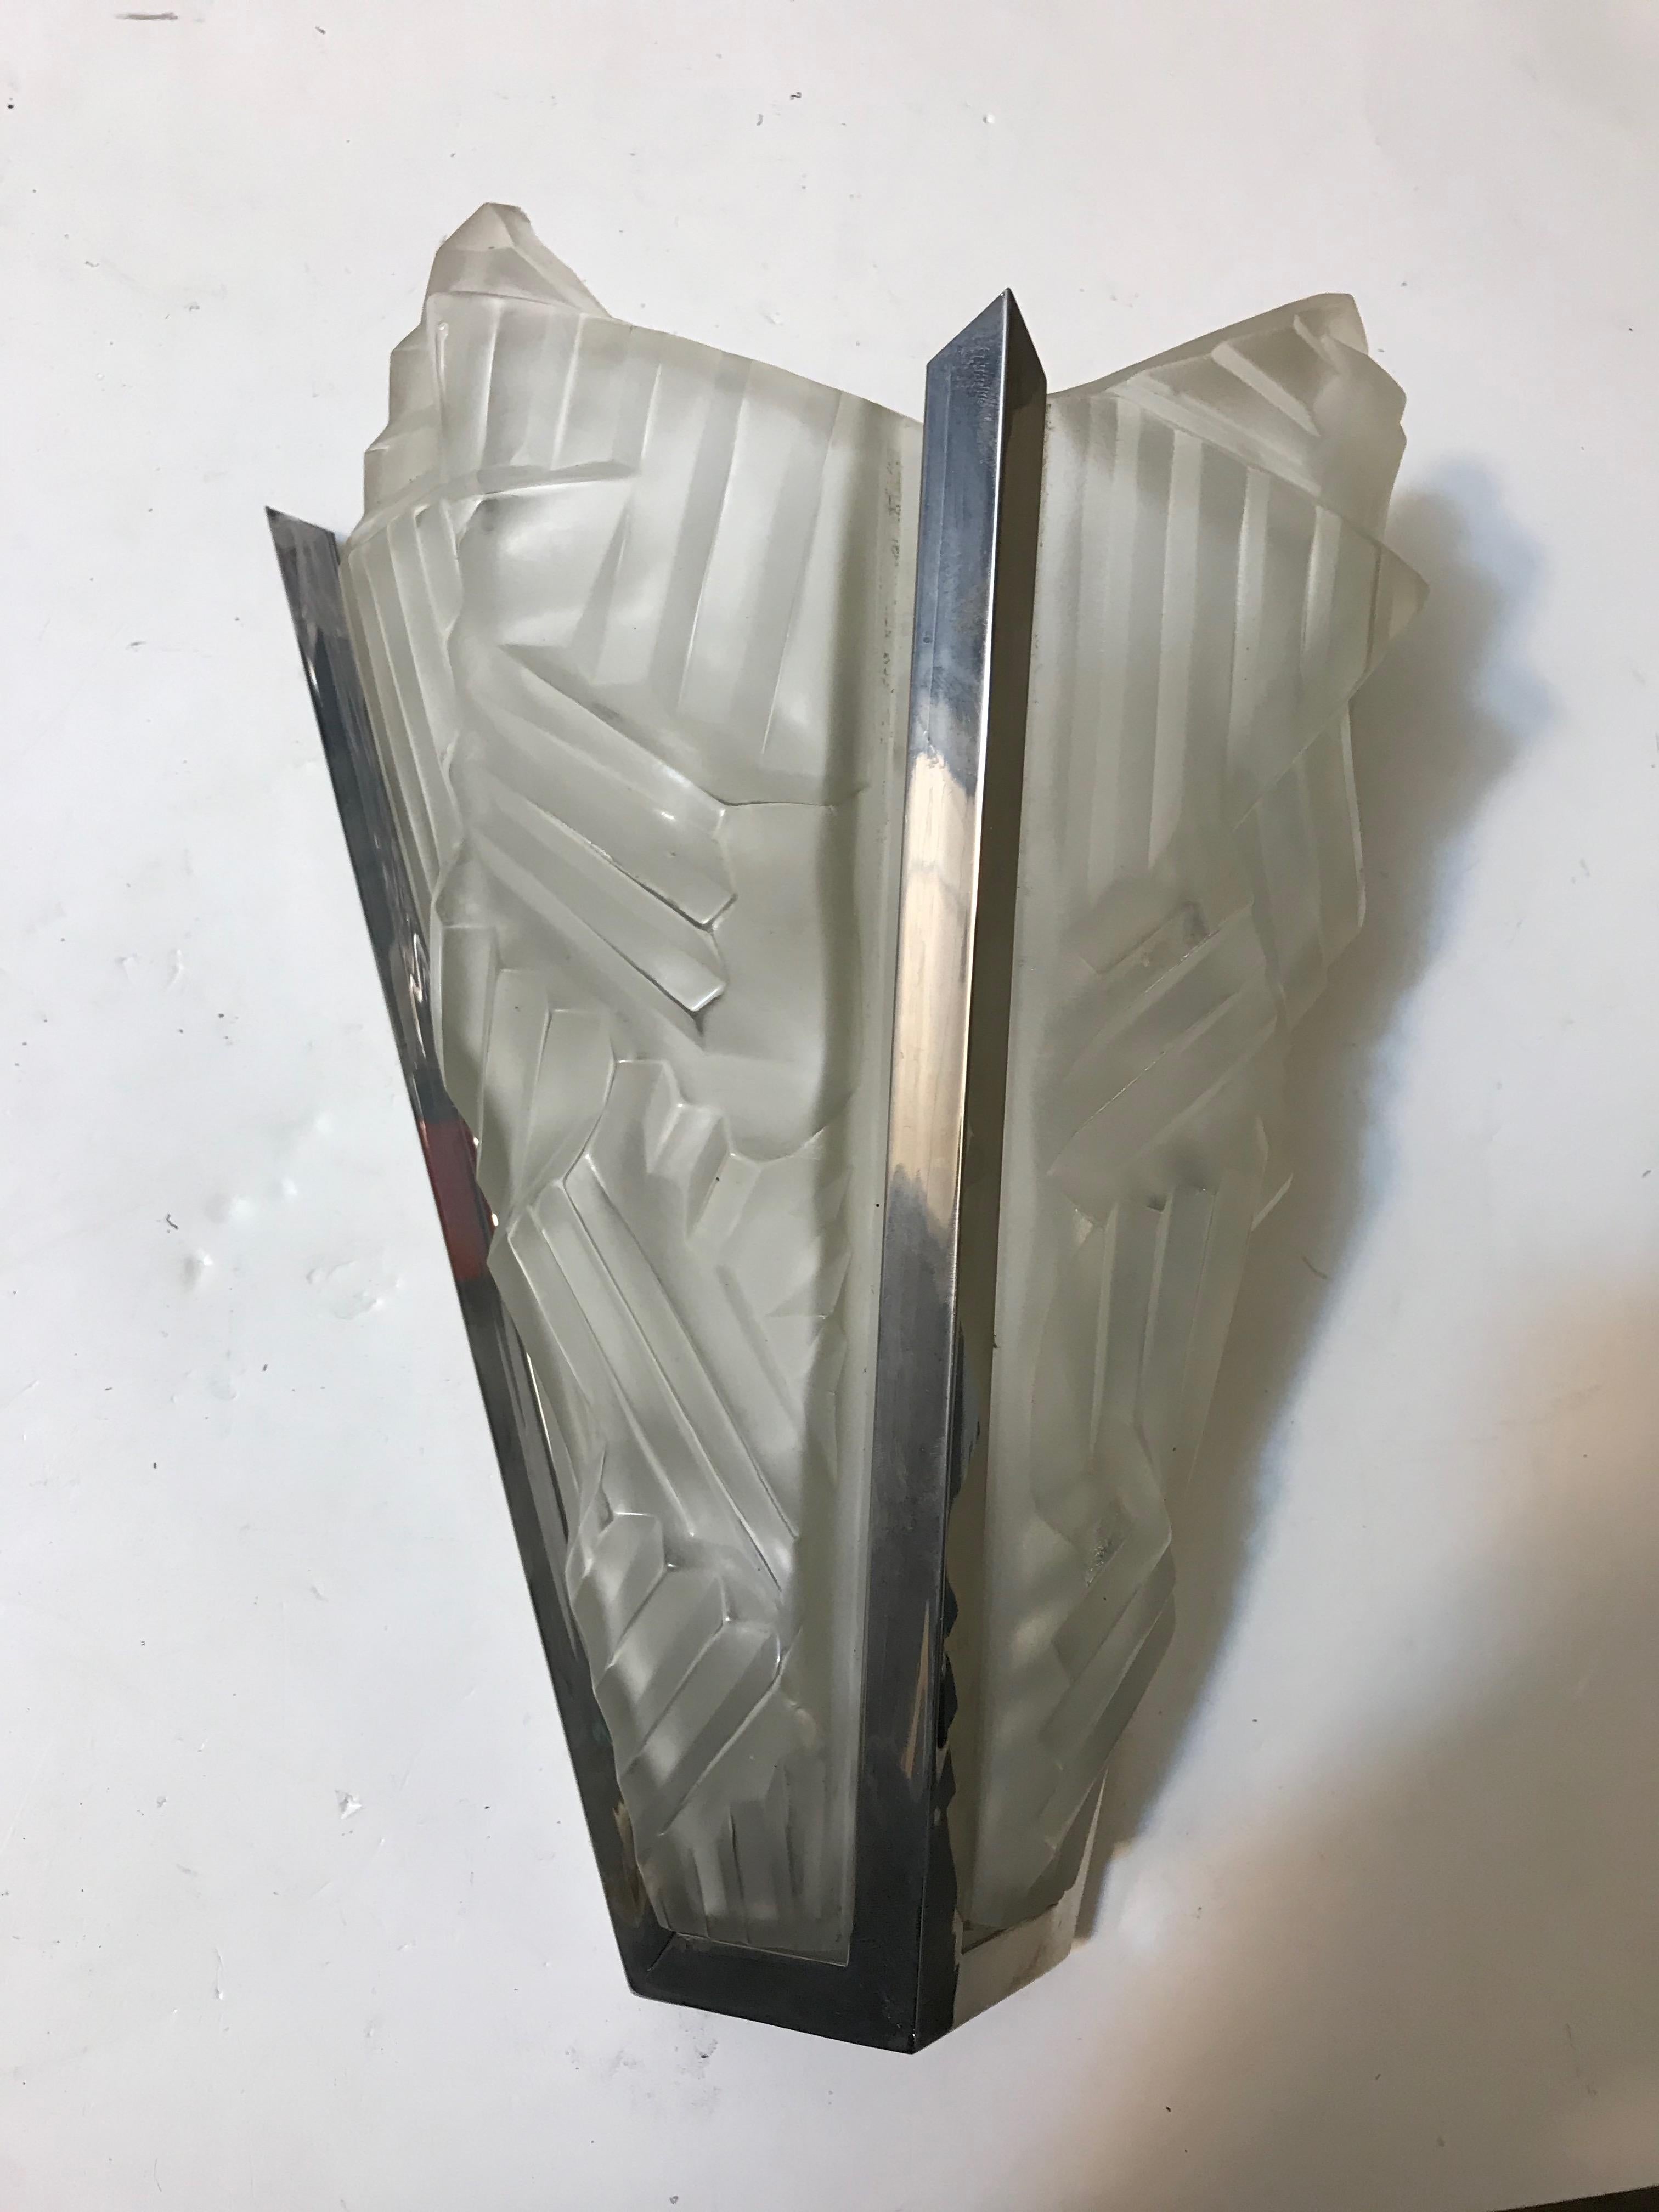 Single French Art Deco sconce signed by Degué. Having two clear frosted glass shades with geometric motif details throughout. Held by nickel design frame. Has been rewired for American use. The sconce takes one 60 watt candelabra bulb. Re plating